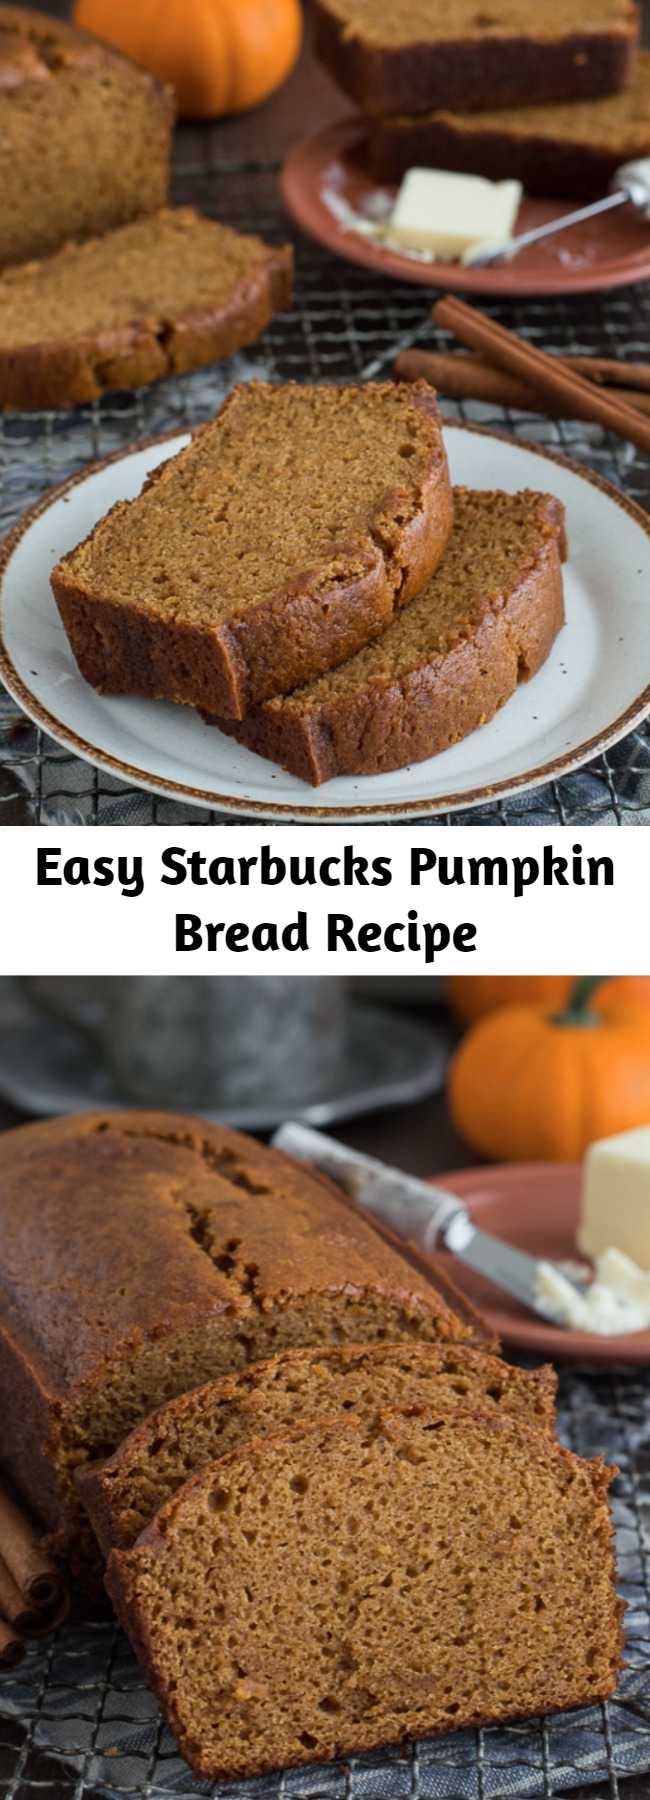 Easy Starbucks Pumpkin Bread Recipe - The easiest pumpkin bread with 12 ingredients and tastes just like Starbucks Pumpkin Pound Cake! Pumpkin bread takes 15 minutes to prep, you will want to share this with friends and family! Can be made in muffin, mini muffin or mini loaf pans. #pumpkinbread #starbuckspumpkinbread #pumpkinloaf #pumpkinpoundcake